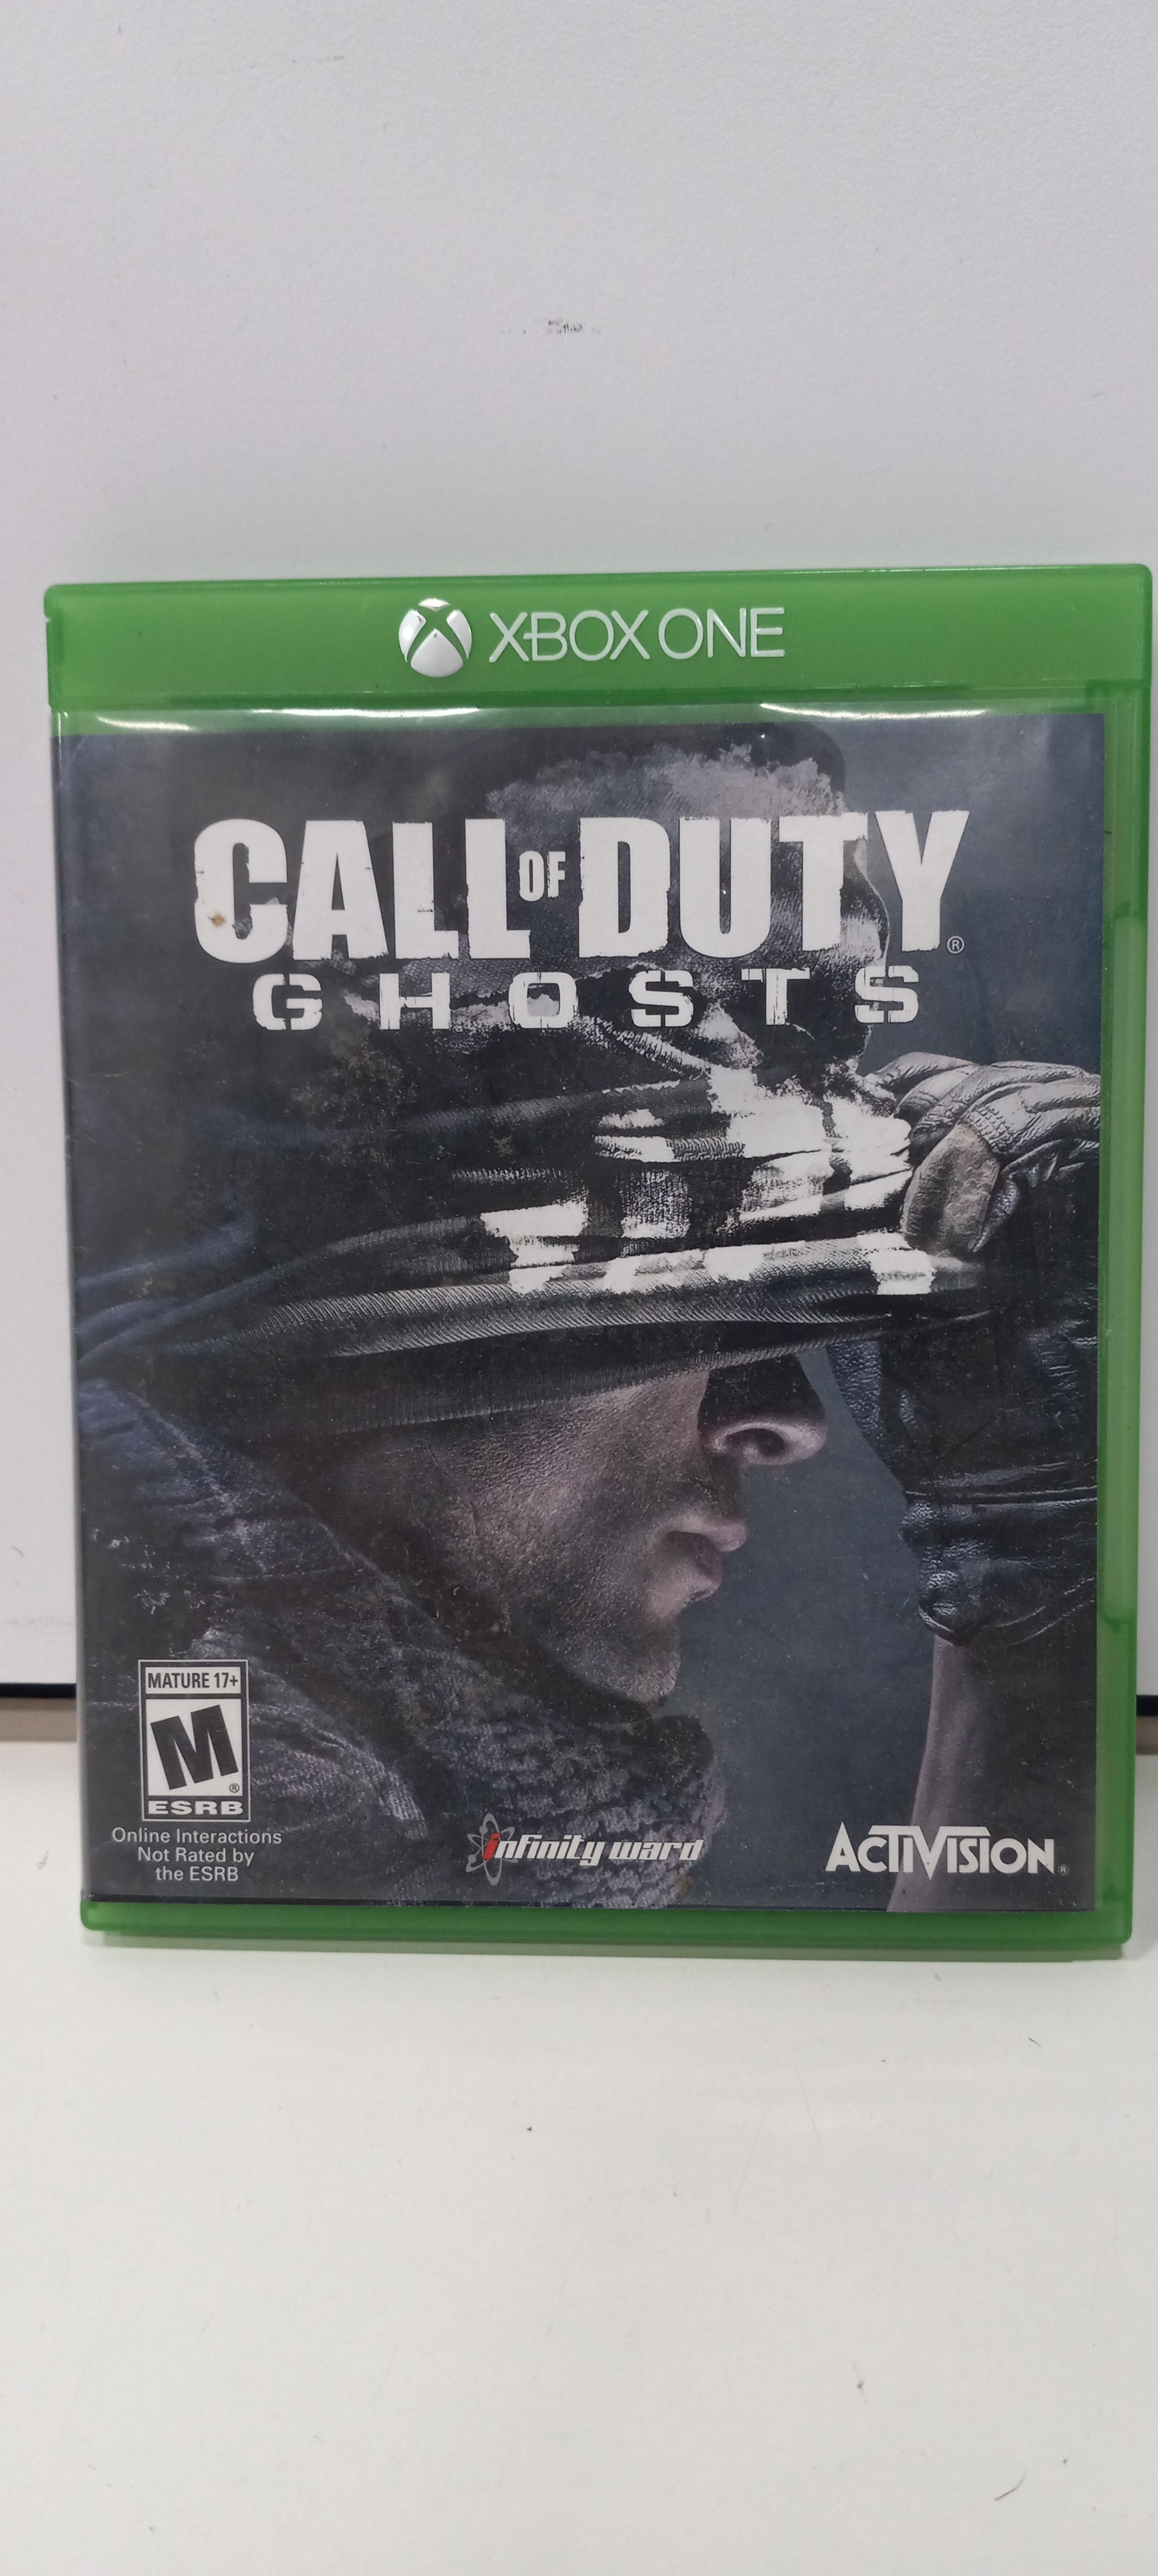 Buy the Call of Duty Ghosts XBOX ONE Video Game